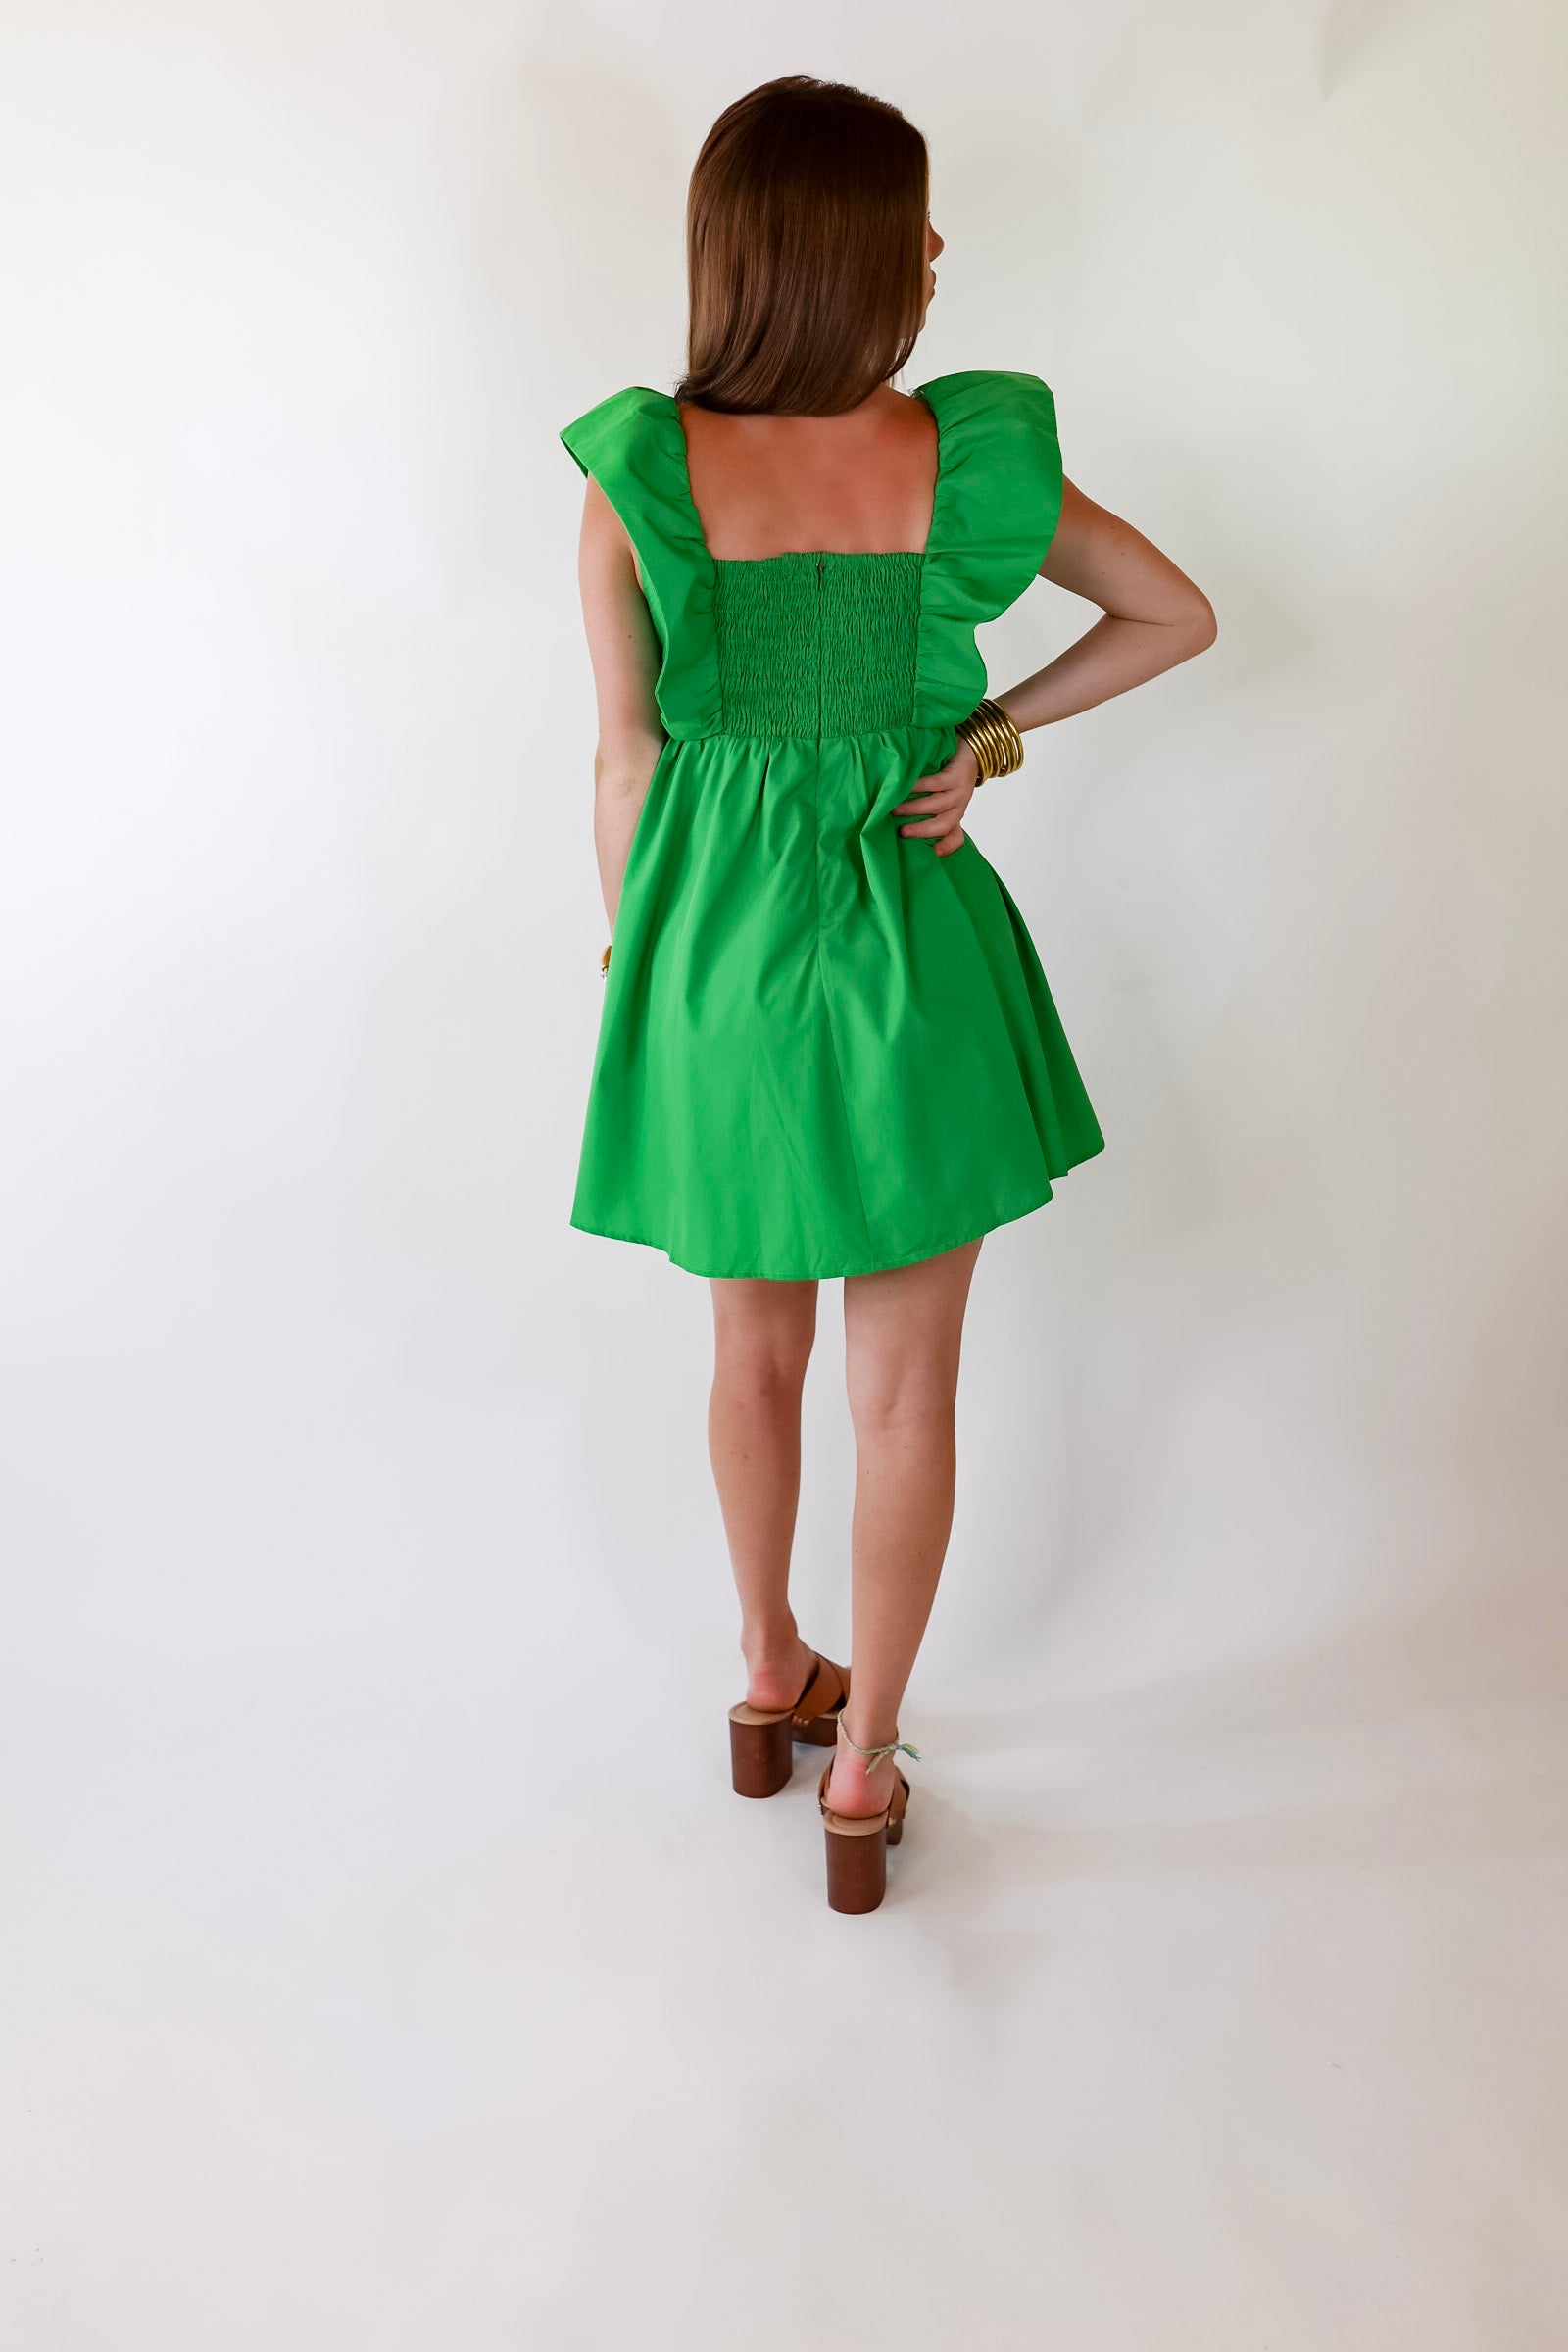 Pixie Perfect Ruffled Sleeve V Neck Dress in Green - Giddy Up Glamour Boutique